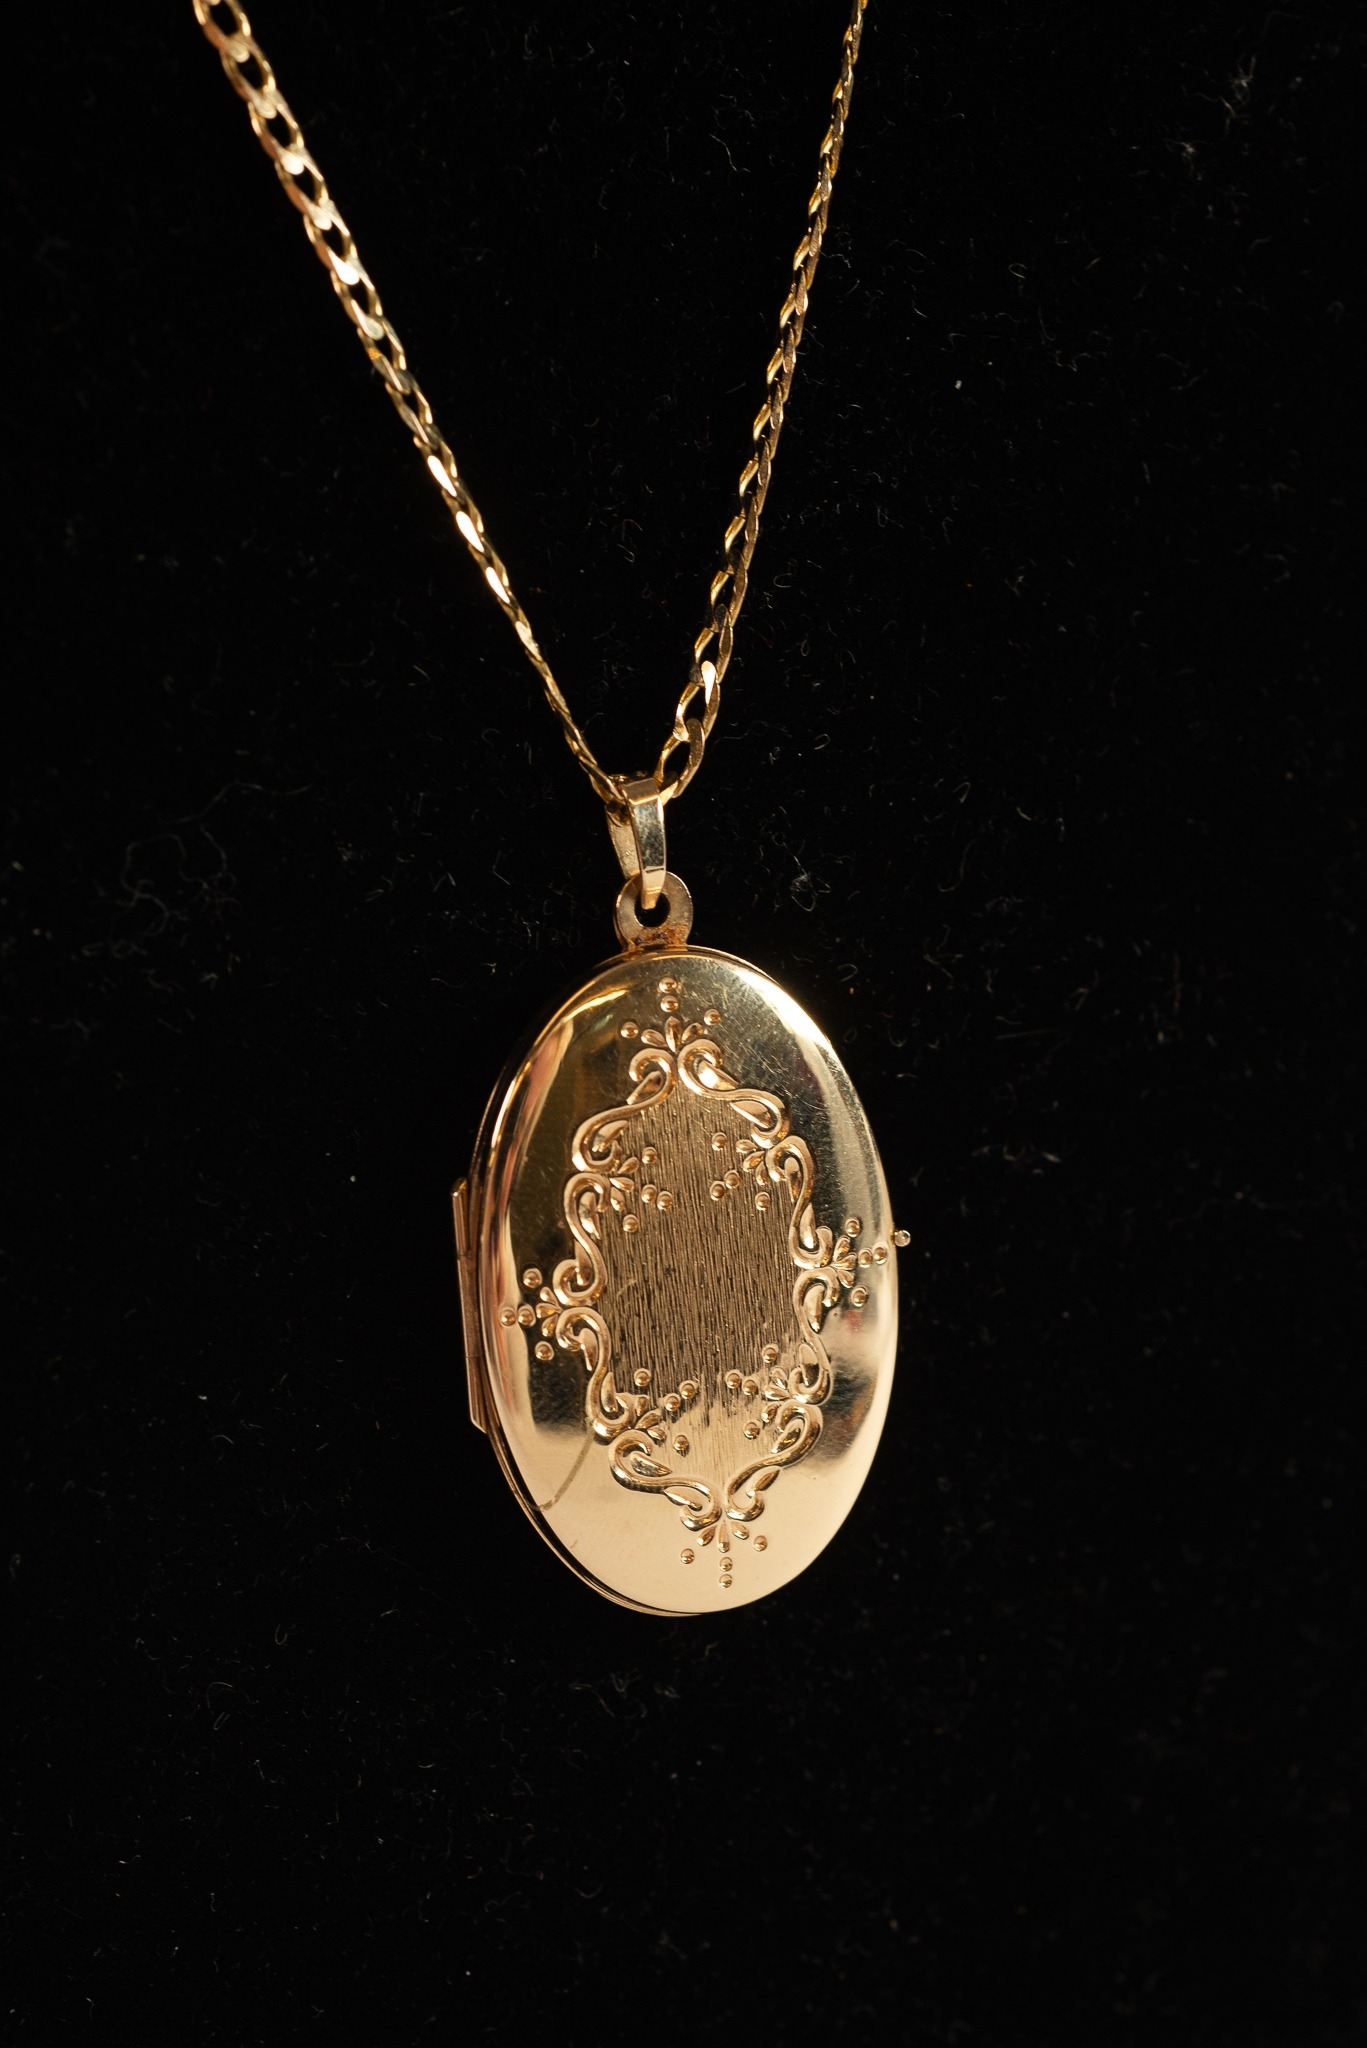 MODERN 9ct GOLD OVAL LOCKET ON 9ct GOLD FLATTENED-LINK CHAIN, 9.1 gms gross - Image 2 of 2